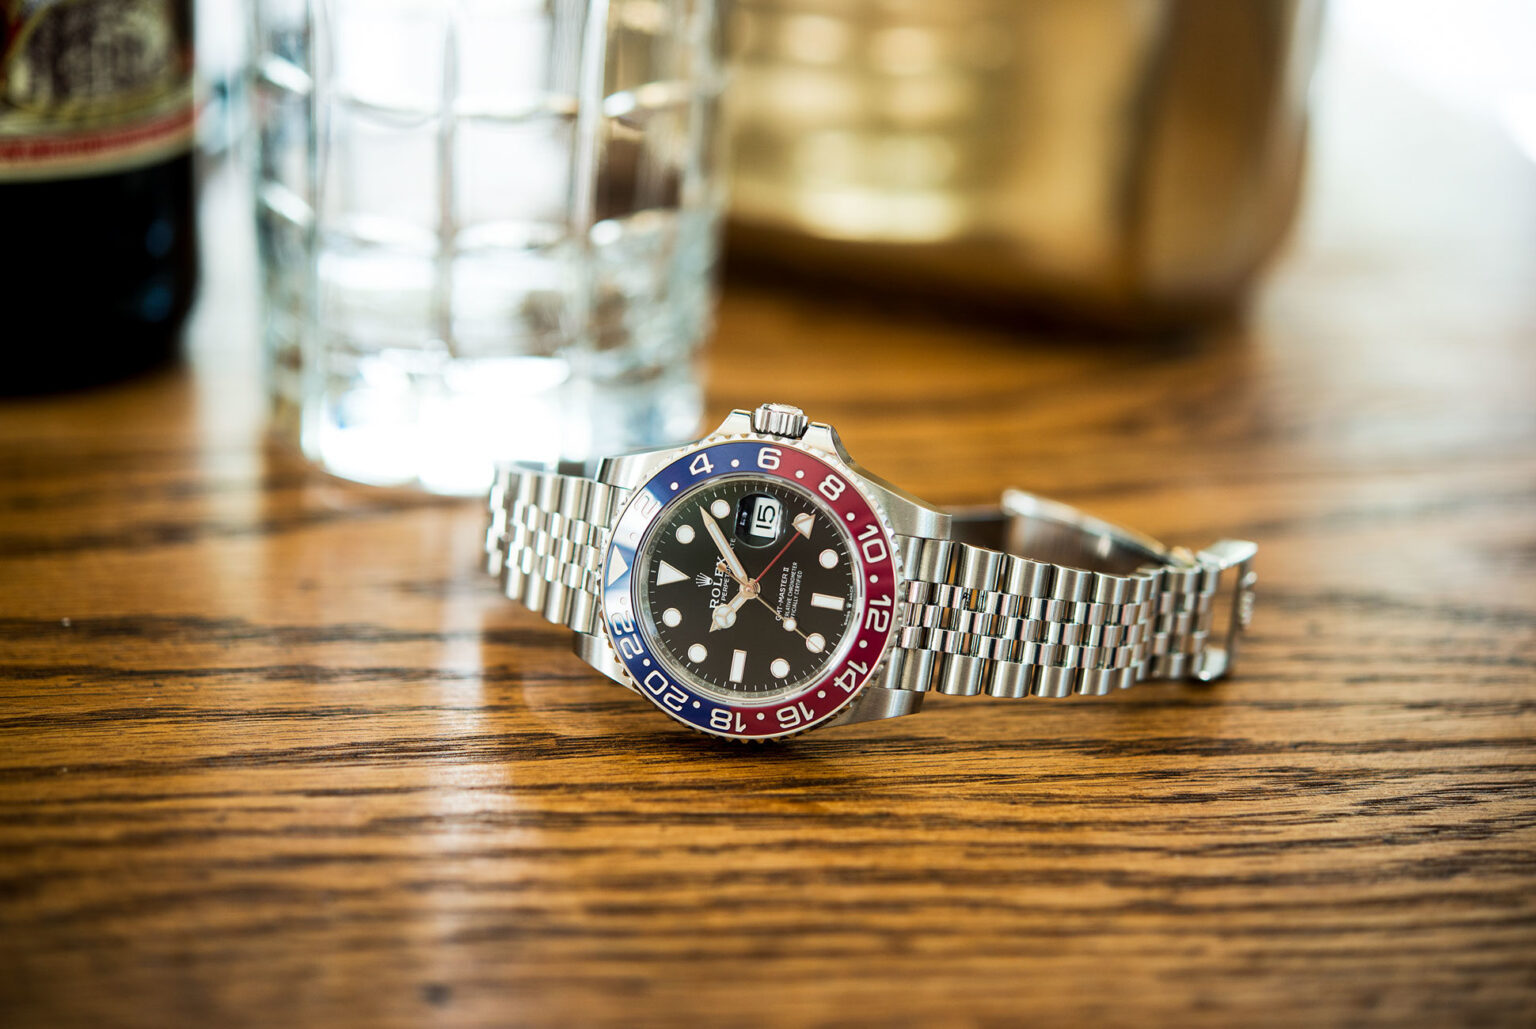 Top 5 Things to Consider Before Buying a Rolex